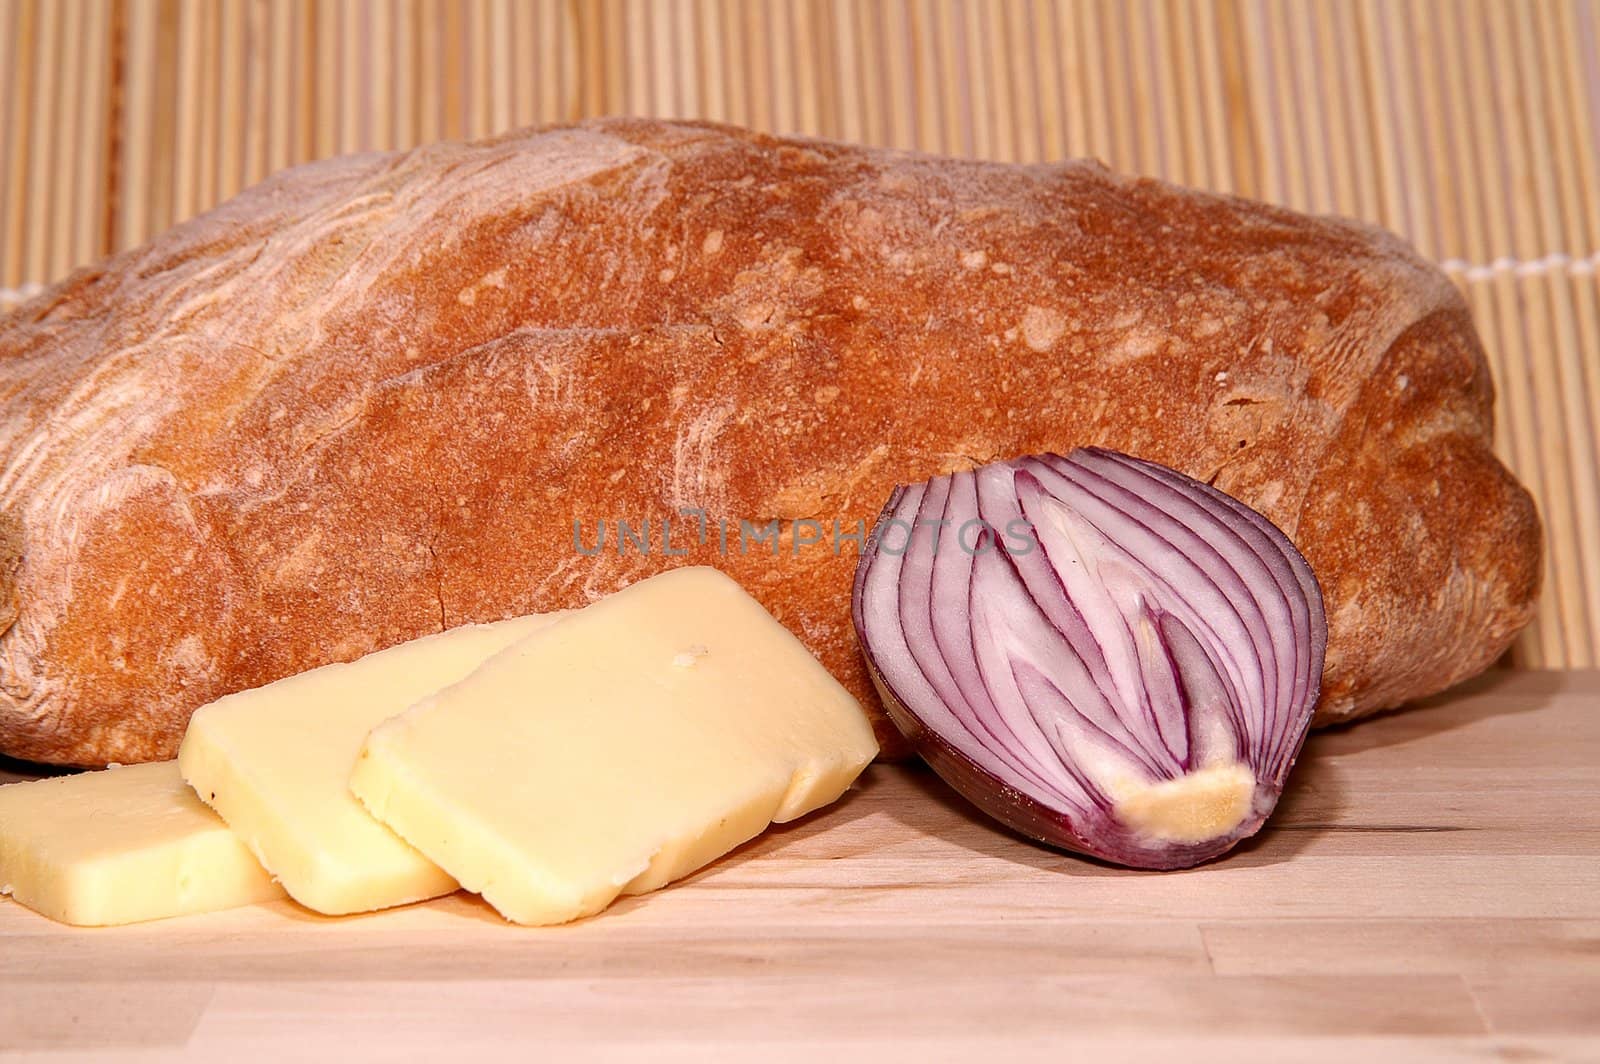 ciabatta bread with cheese slices and onion on wooden plate